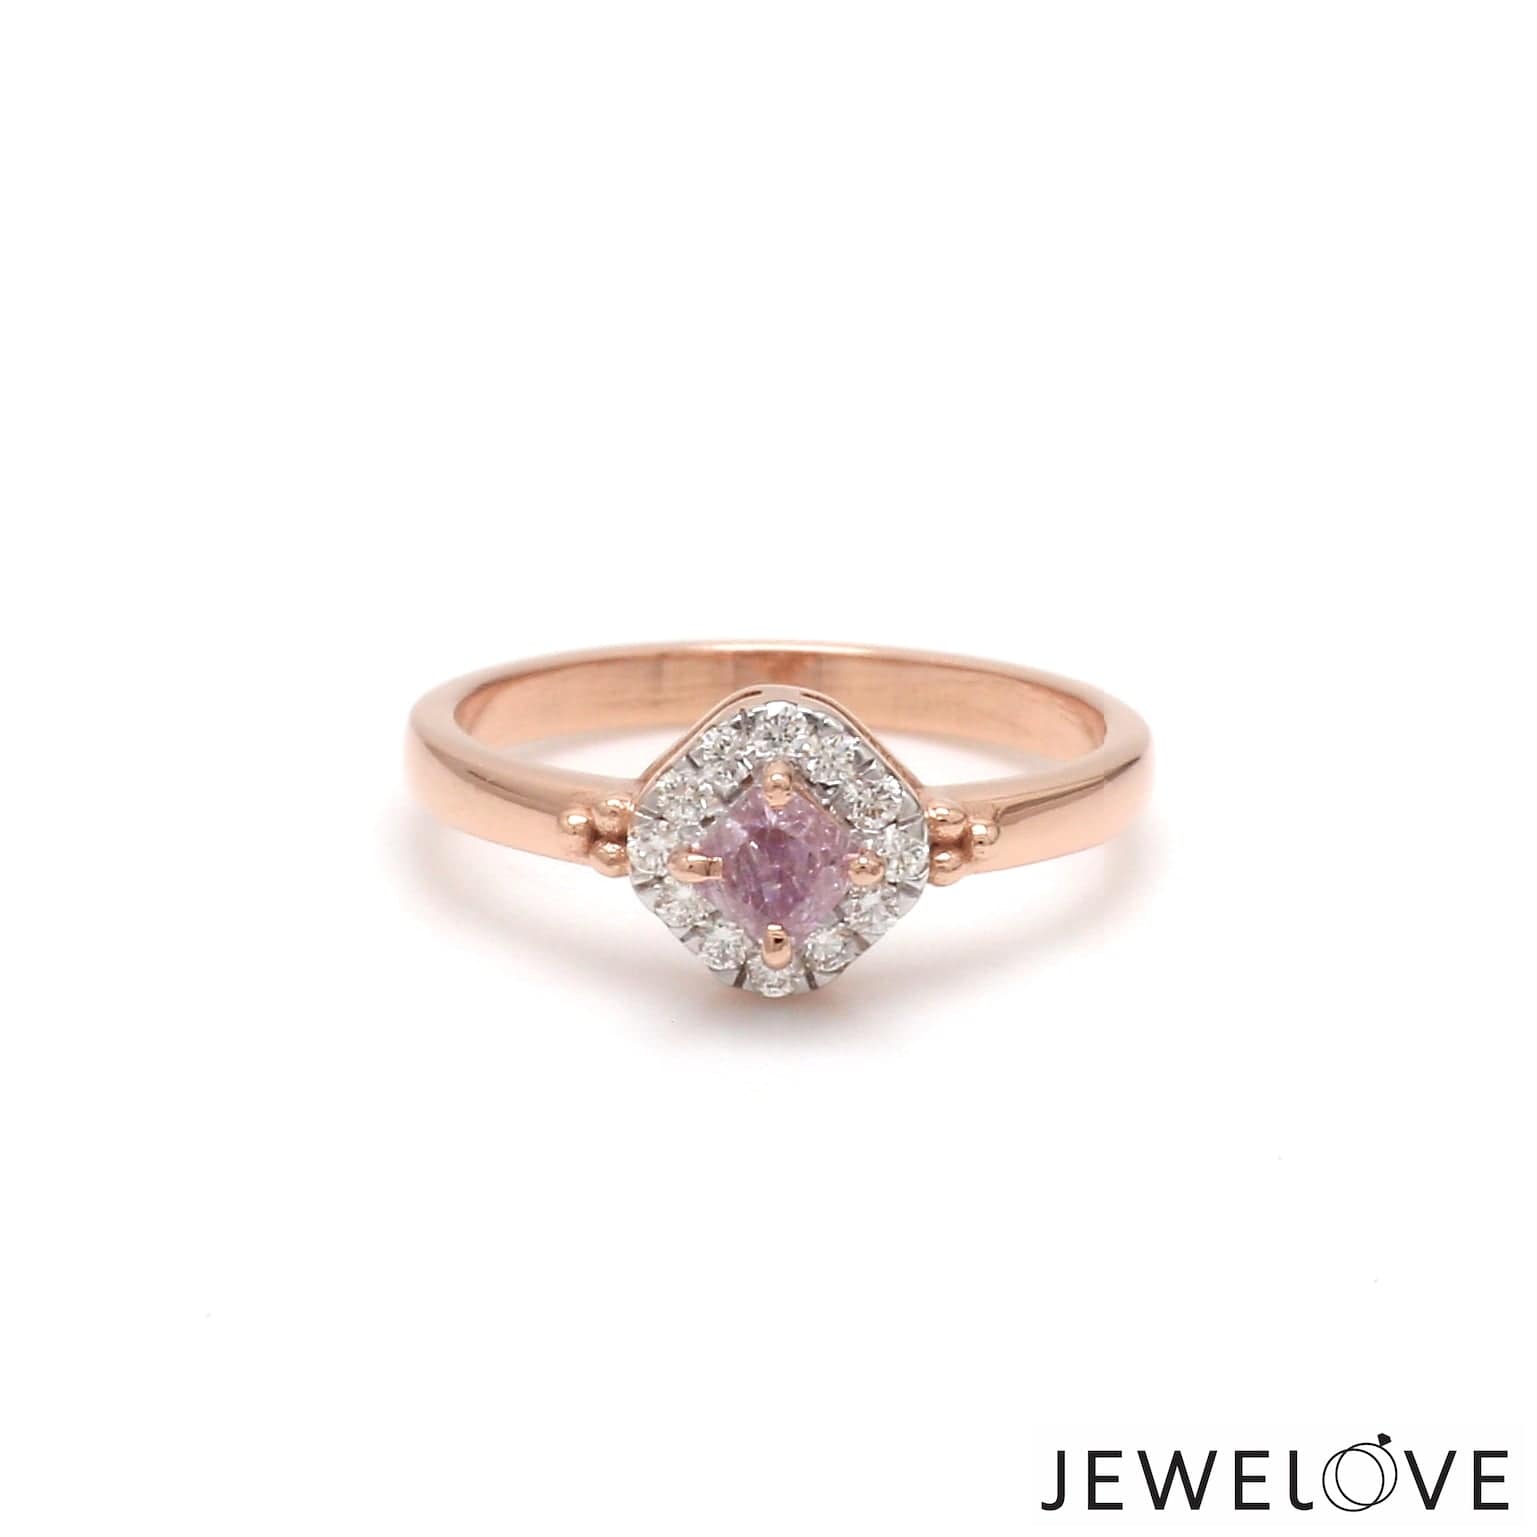 PINK AND WHITE DIAMOND RING - Provident Jewelry